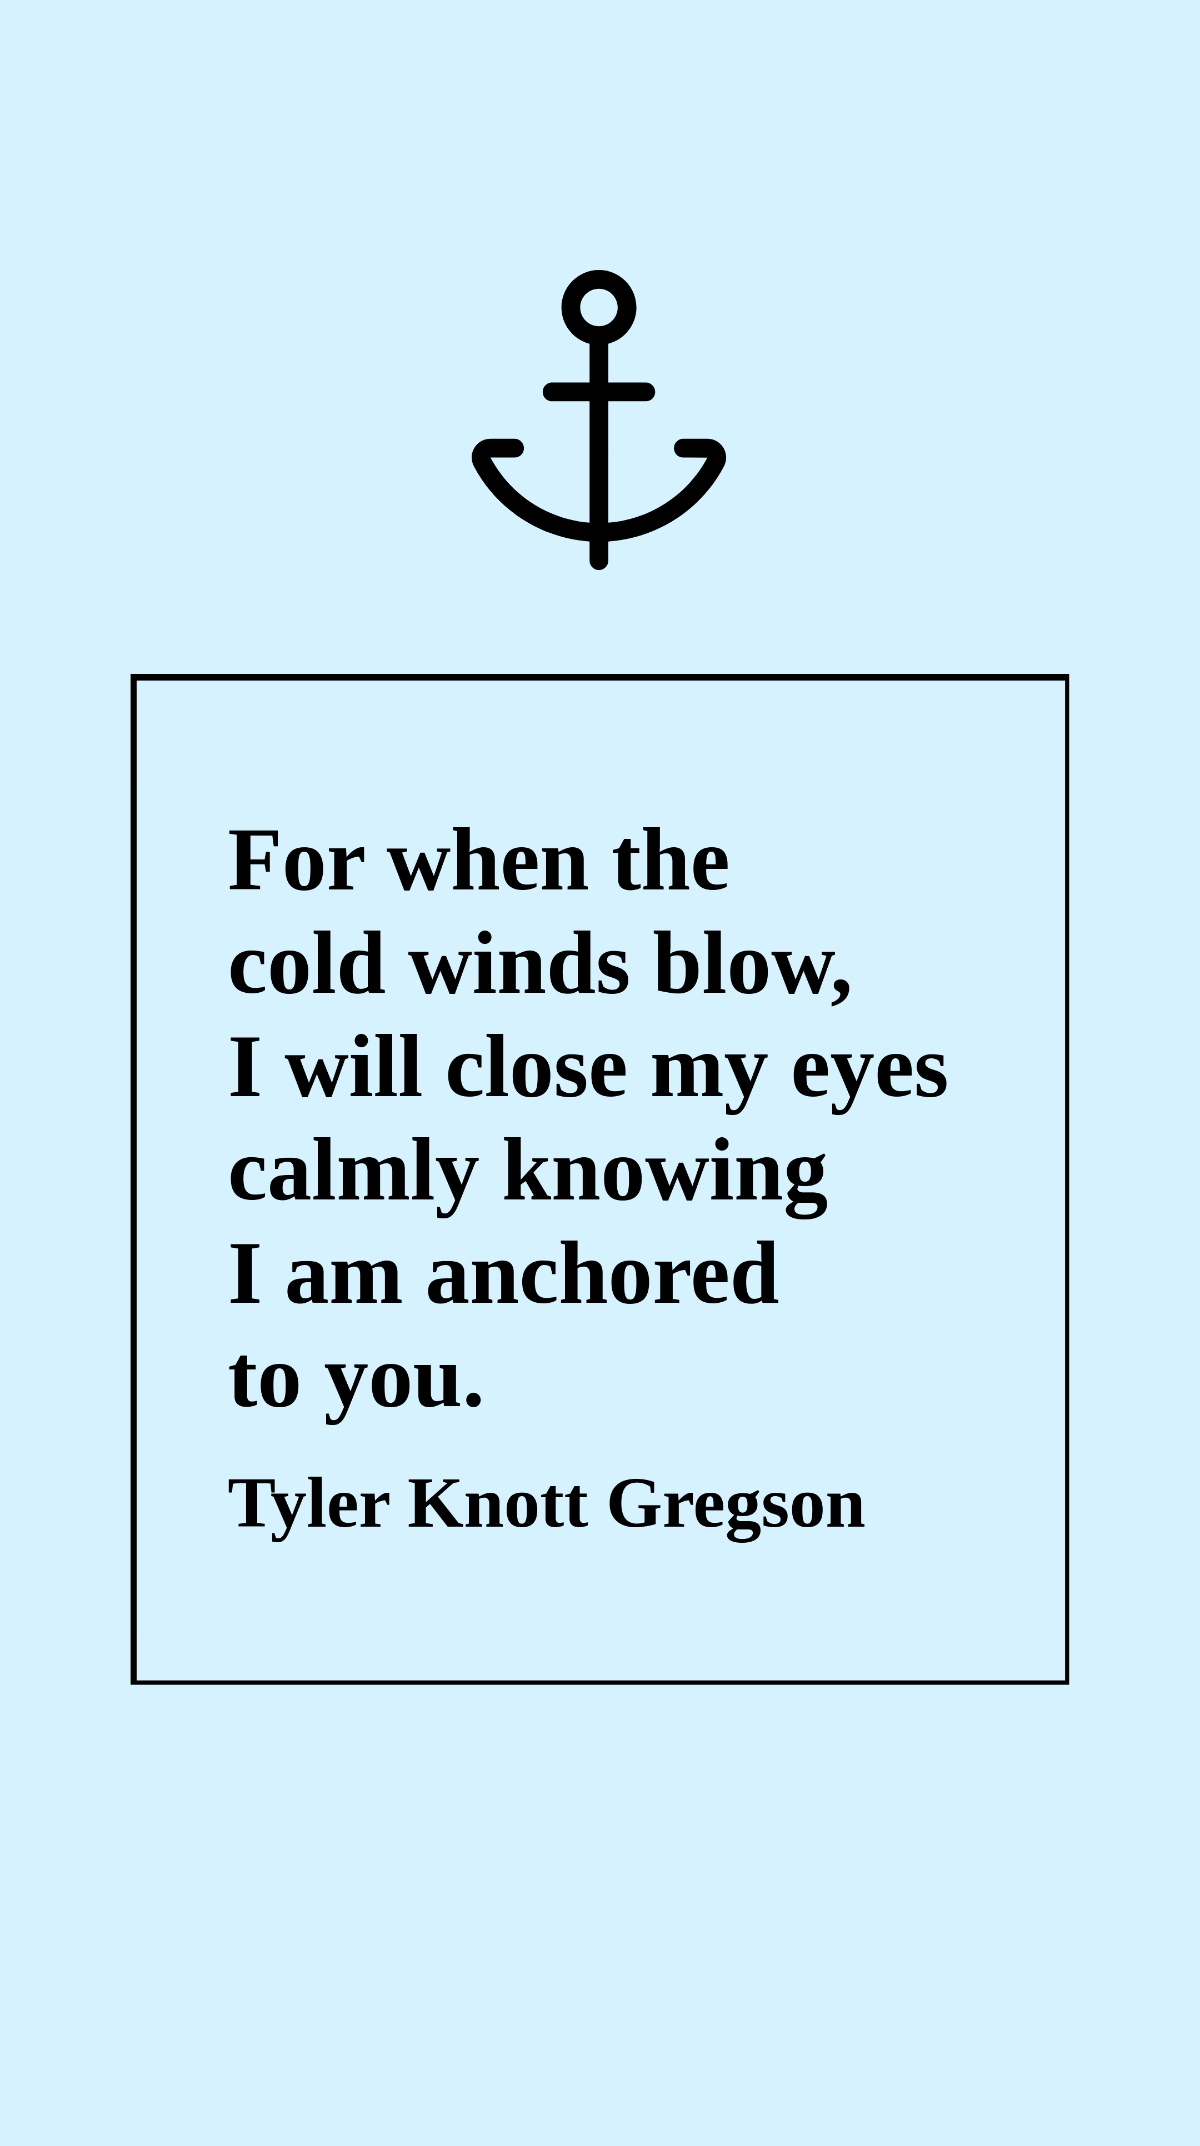 Free Tyler Knott Gregson - For when the cold winds blow, I will close my eyes calmly knowing I am anchored to you. Template